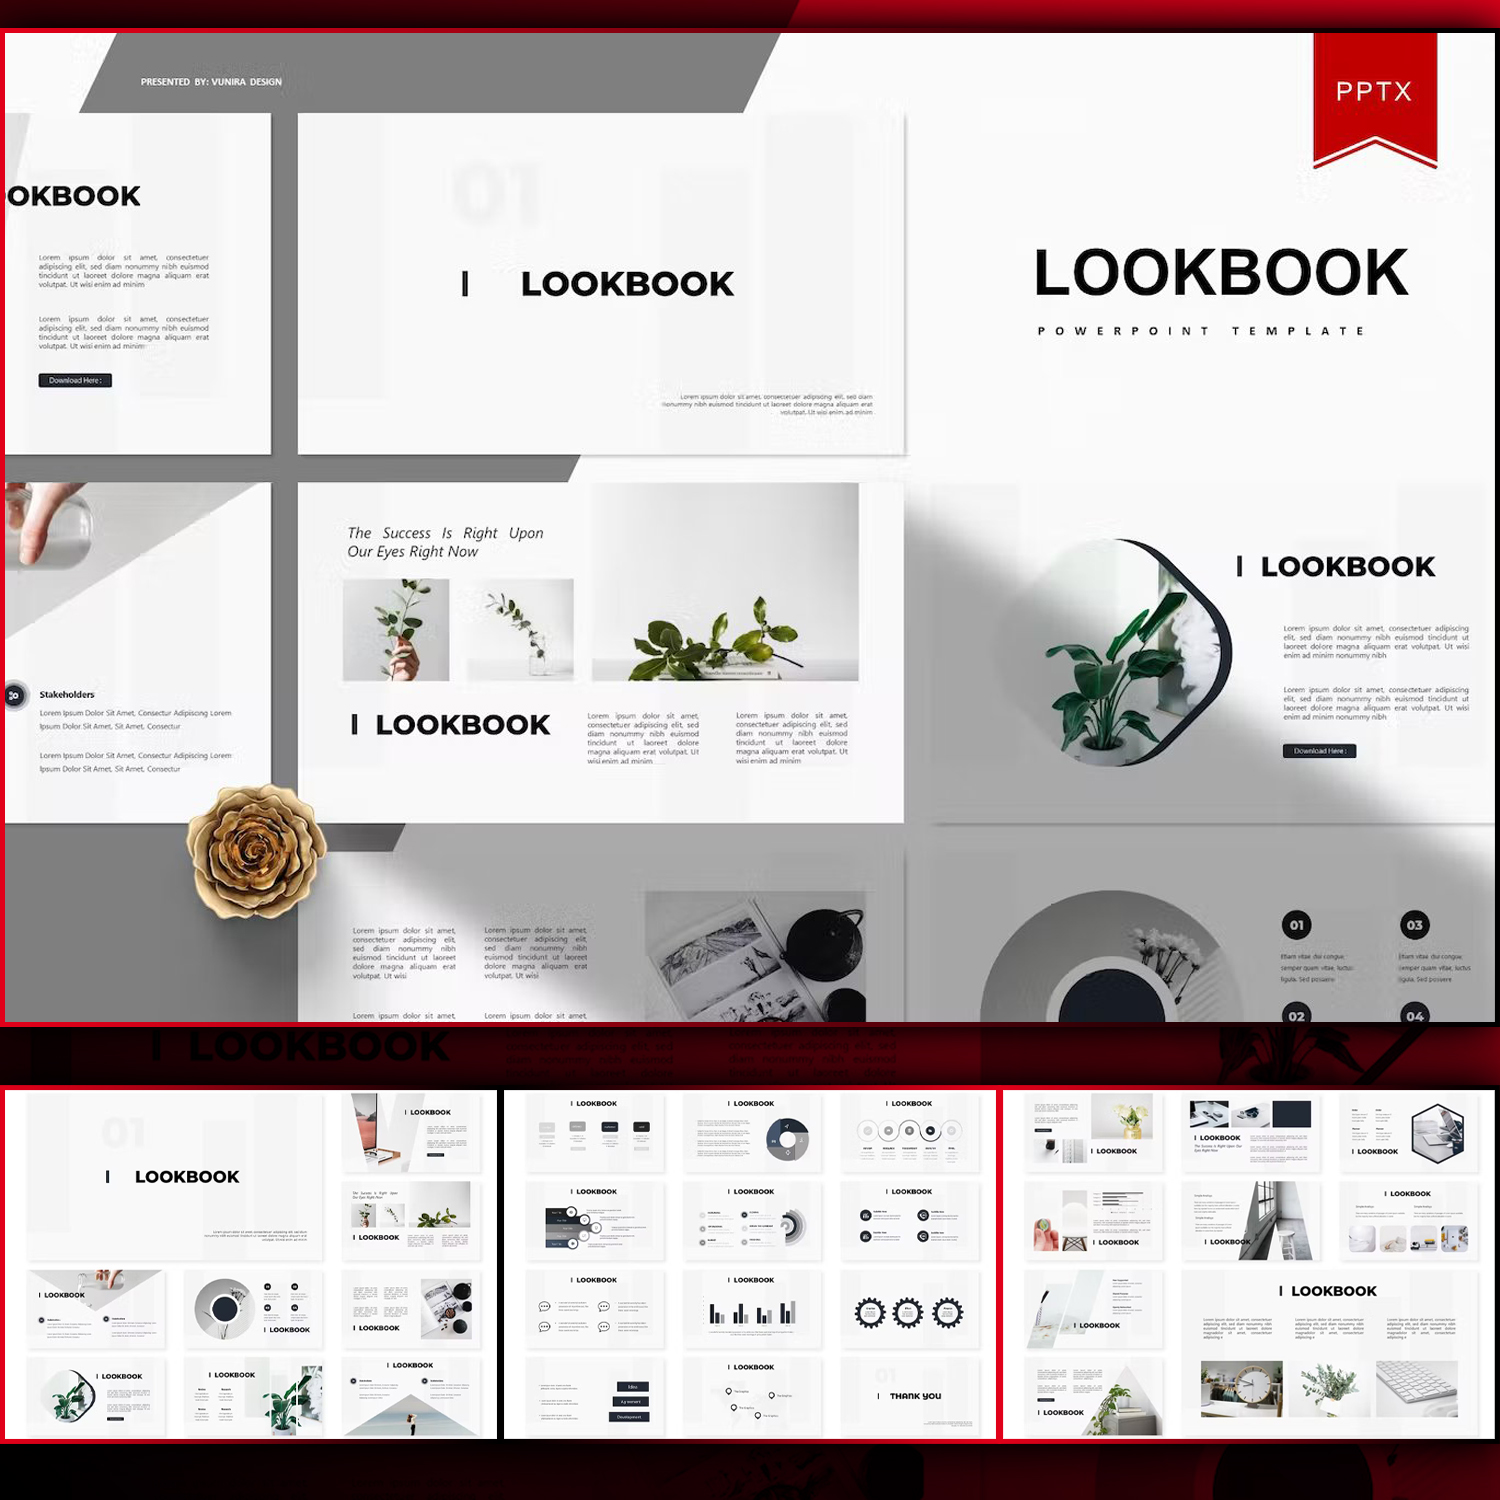 Images with lookbook powerpoint template.